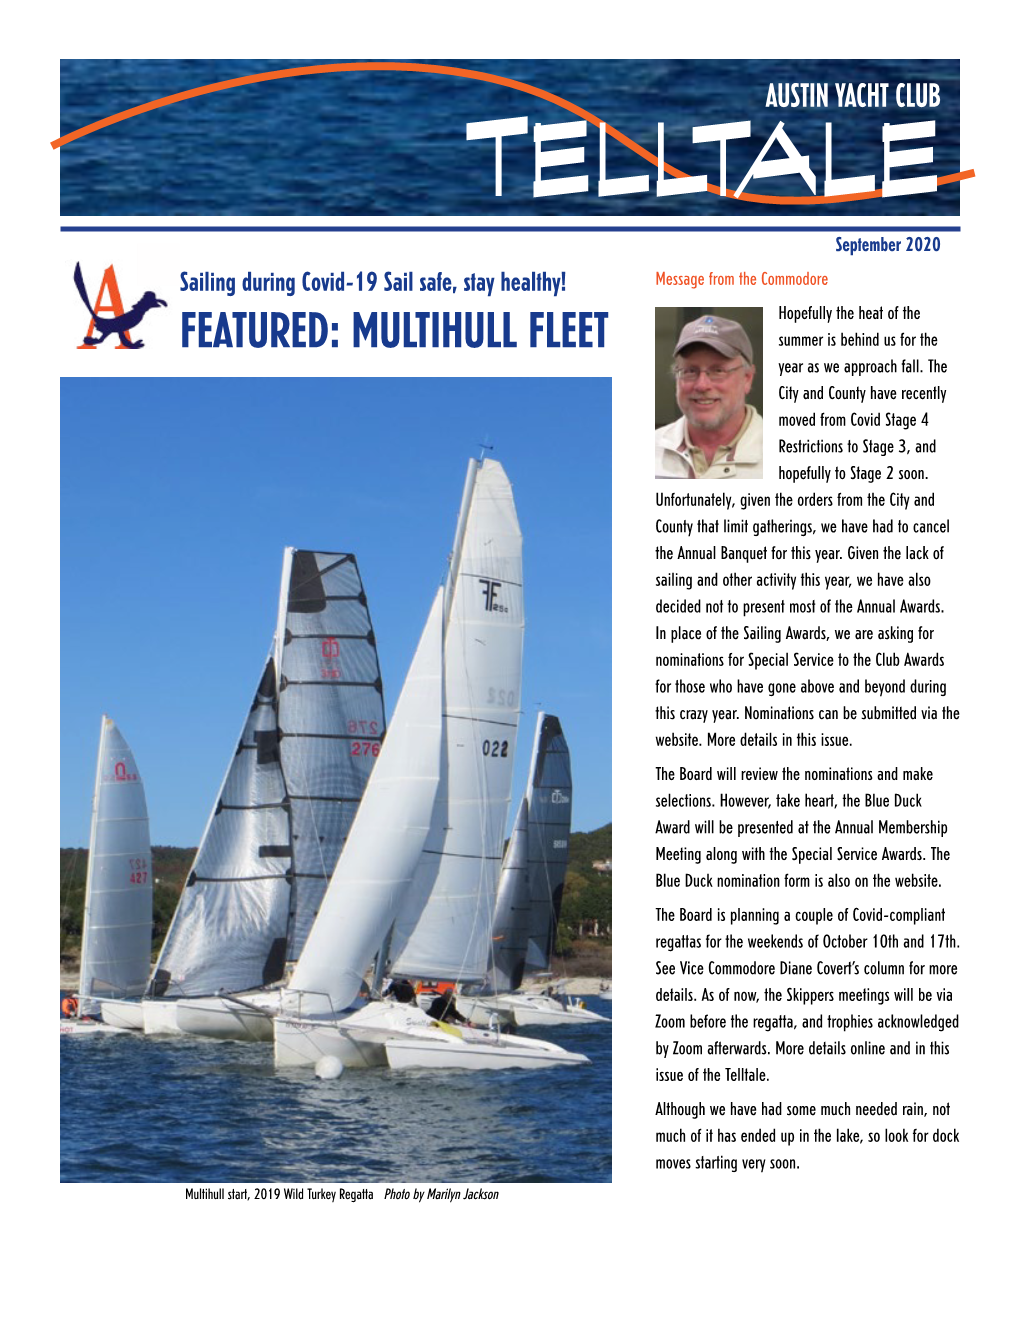 FEATURED: MULTIHULL FLEET Summer Is Behind Us for the Year As We Approach Fall